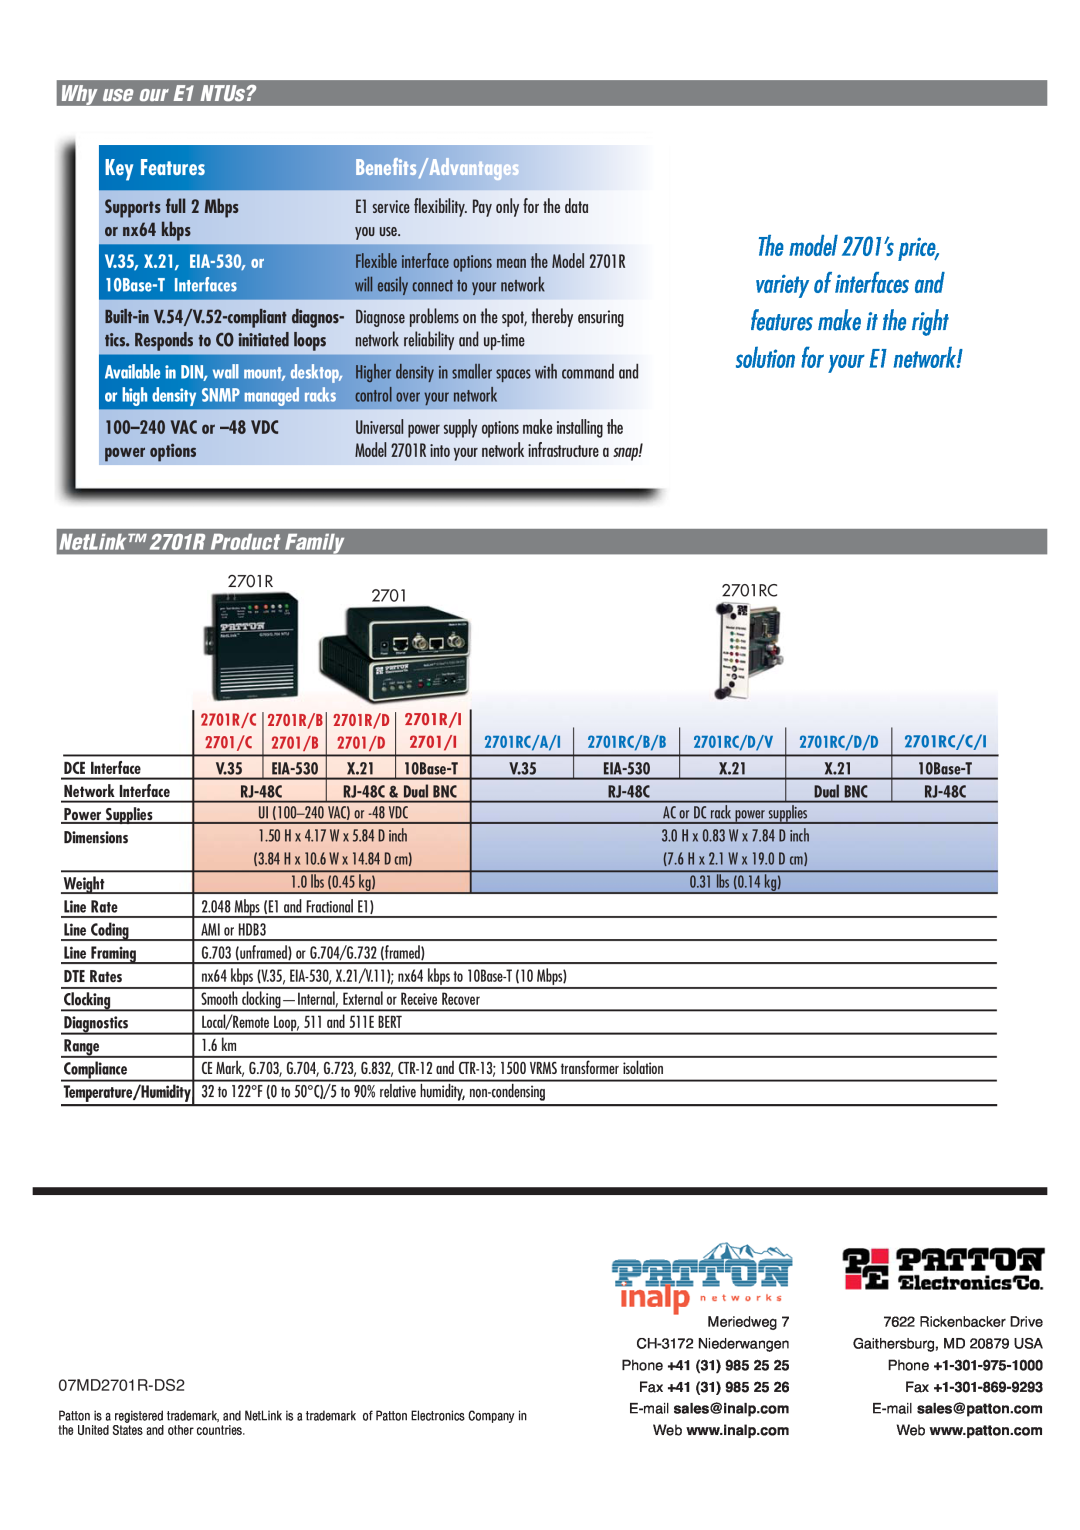 Patton electronic Why use our E1 NTUs?, KeyFeatures, Benefits/Advantages, NetLink 2701R Product Family, 2701R/D, 2701/C 